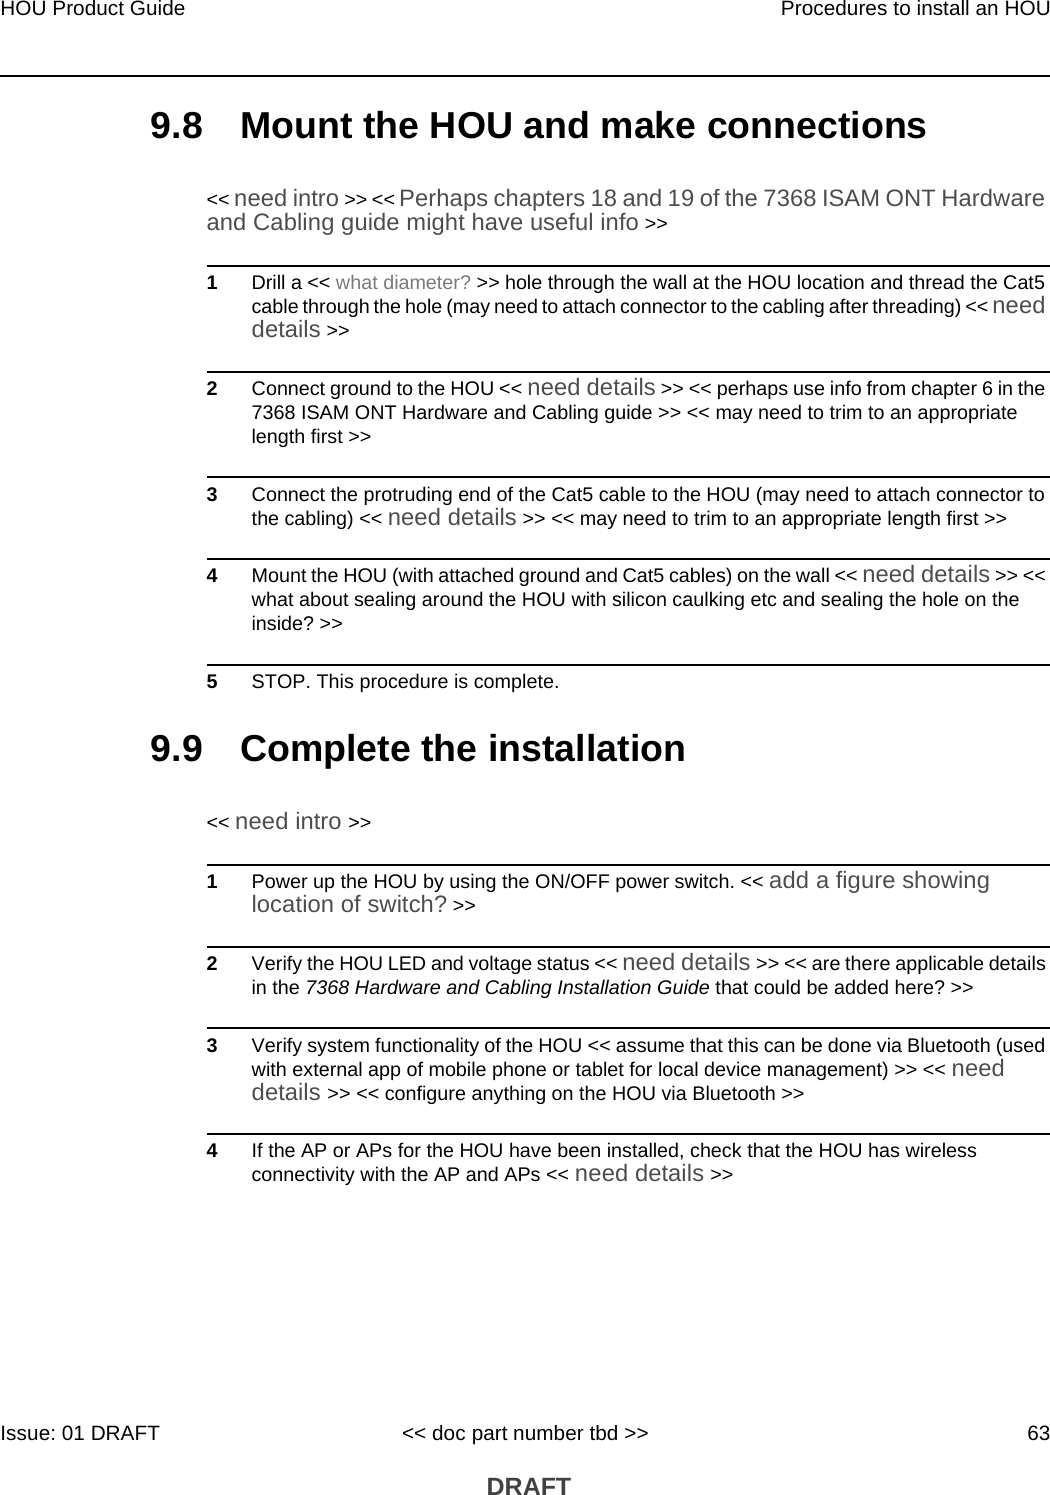 HOU Product Guide Procedures to install an HOUIssue: 01 DRAFT &lt;&lt; doc part number tbd &gt;&gt; 63 DRAFT9.8 Mount the HOU and make connections&lt;&lt; need intro &gt;&gt; &lt;&lt; Perhaps chapters 18 and 19 of the 7368 ISAM ONT Hardware and Cabling guide might have useful info &gt;&gt; 1Drill a &lt;&lt; what diameter? &gt;&gt; hole through the wall at the HOU location and thread the Cat5 cable through the hole (may need to attach connector to the cabling after threading) &lt;&lt; need details &gt;&gt; 2Connect ground to the HOU &lt;&lt; need details &gt;&gt; &lt;&lt; perhaps use info from chapter 6 in the 7368 ISAM ONT Hardware and Cabling guide &gt;&gt; &lt;&lt; may need to trim to an appropriate length first &gt;&gt; 3Connect the protruding end of the Cat5 cable to the HOU (may need to attach connector to the cabling) &lt;&lt; need details &gt;&gt; &lt;&lt; may need to trim to an appropriate length first &gt;&gt;4Mount the HOU (with attached ground and Cat5 cables) on the wall &lt;&lt; need details &gt;&gt; &lt;&lt; what about sealing around the HOU with silicon caulking etc and sealing the hole on the inside? &gt;&gt;5STOP. This procedure is complete.9.9 Complete the installation&lt;&lt; need intro &gt;&gt;1Power up the HOU by using the ON/OFF power switch. &lt;&lt; add a figure showing location of switch? &gt;&gt; 2Verify the HOU LED and voltage status &lt;&lt; need details &gt;&gt; &lt;&lt; are there applicable details in the 7368 Hardware and Cabling Installation Guide that could be added here? &gt;&gt;3Verify system functionality of the HOU &lt;&lt; assume that this can be done via Bluetooth (used with external app of mobile phone or tablet for local device management) &gt;&gt; &lt;&lt; need details &gt;&gt; &lt;&lt; configure anything on the HOU via Bluetooth &gt;&gt;4If the AP or APs for the HOU have been installed, check that the HOU has wireless connectivity with the AP and APs &lt;&lt; need details &gt;&gt;